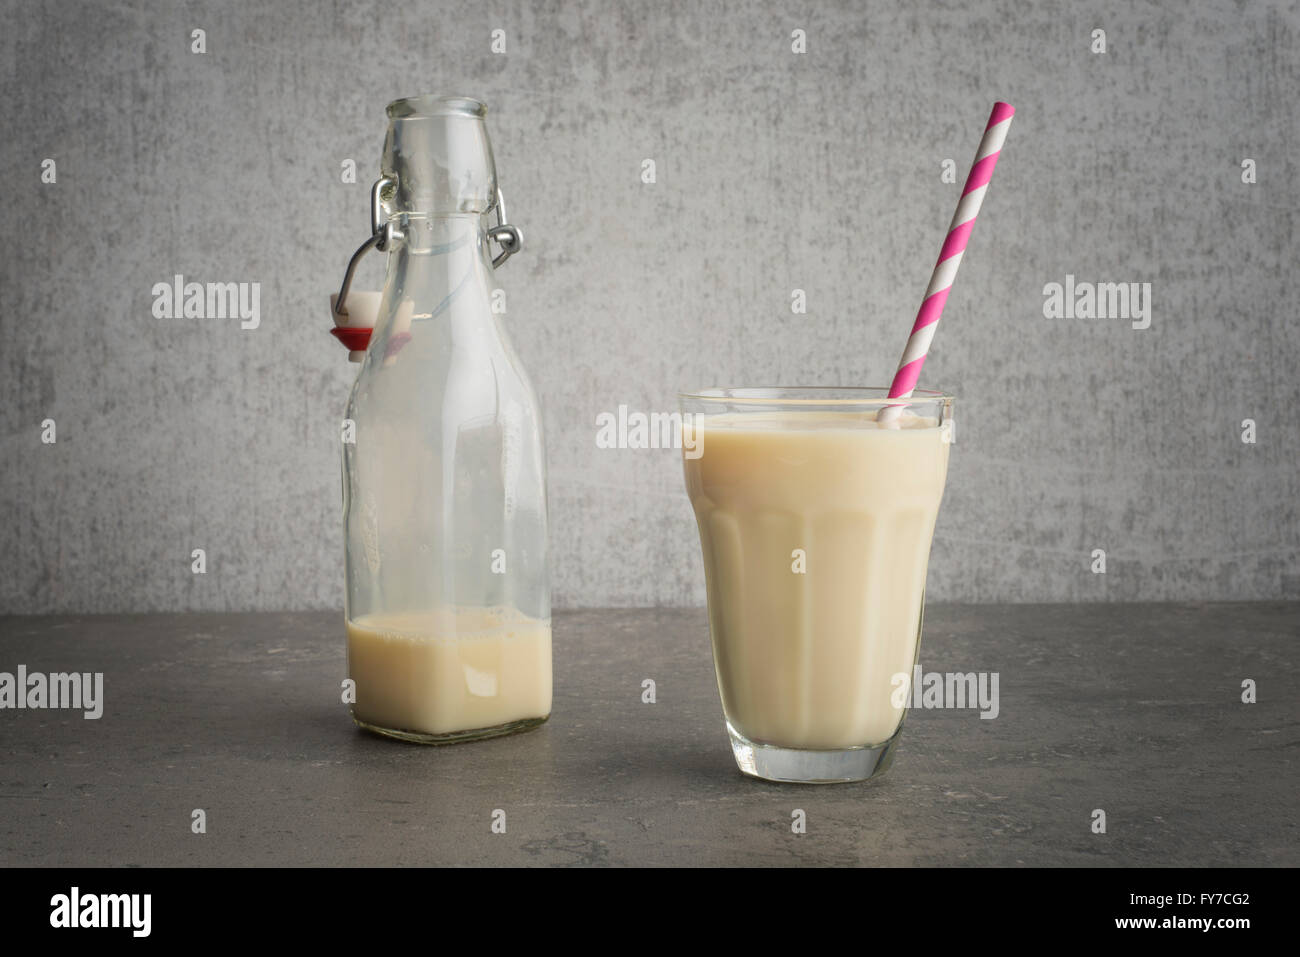 Soy milk in a glass with striped drinking straw and glass bottle on stone table. Stock Photo